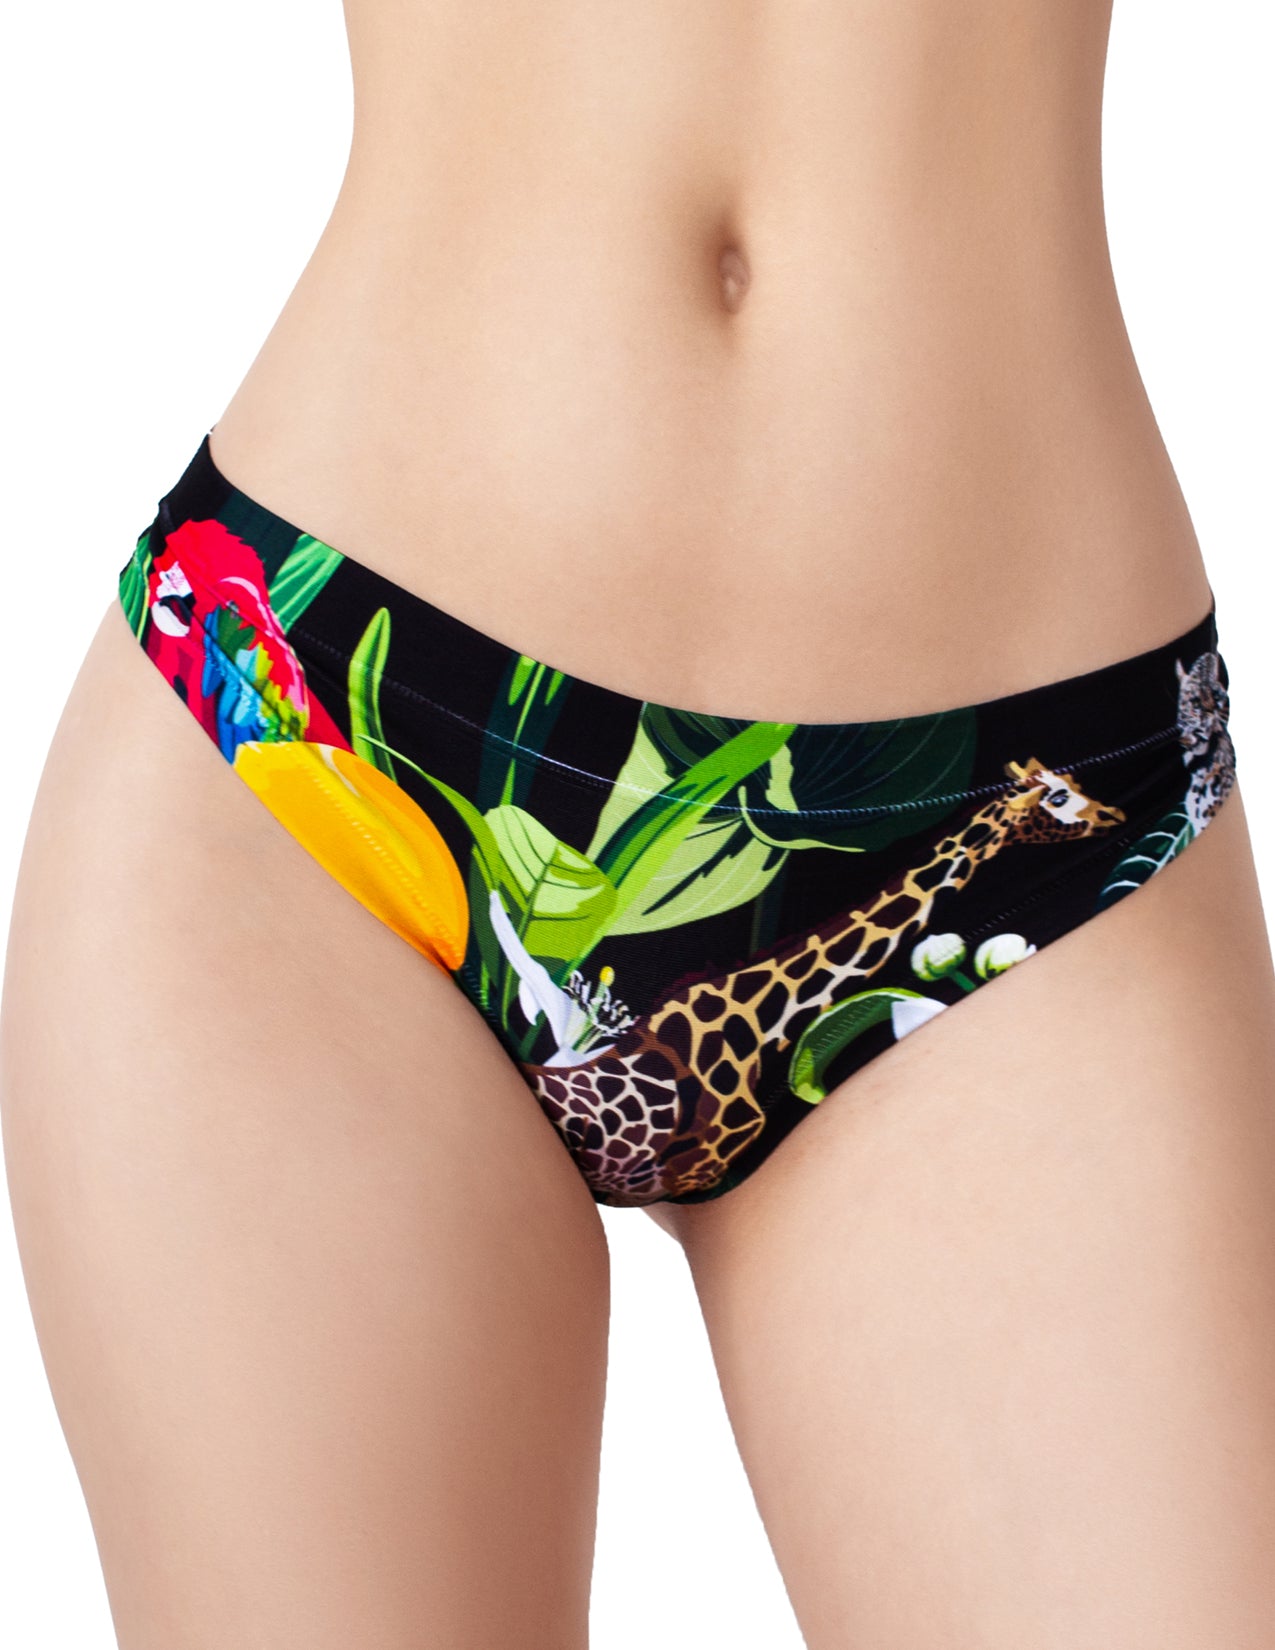 memème ZOO Panty for Women Elastic and Durable, Perfect Fit